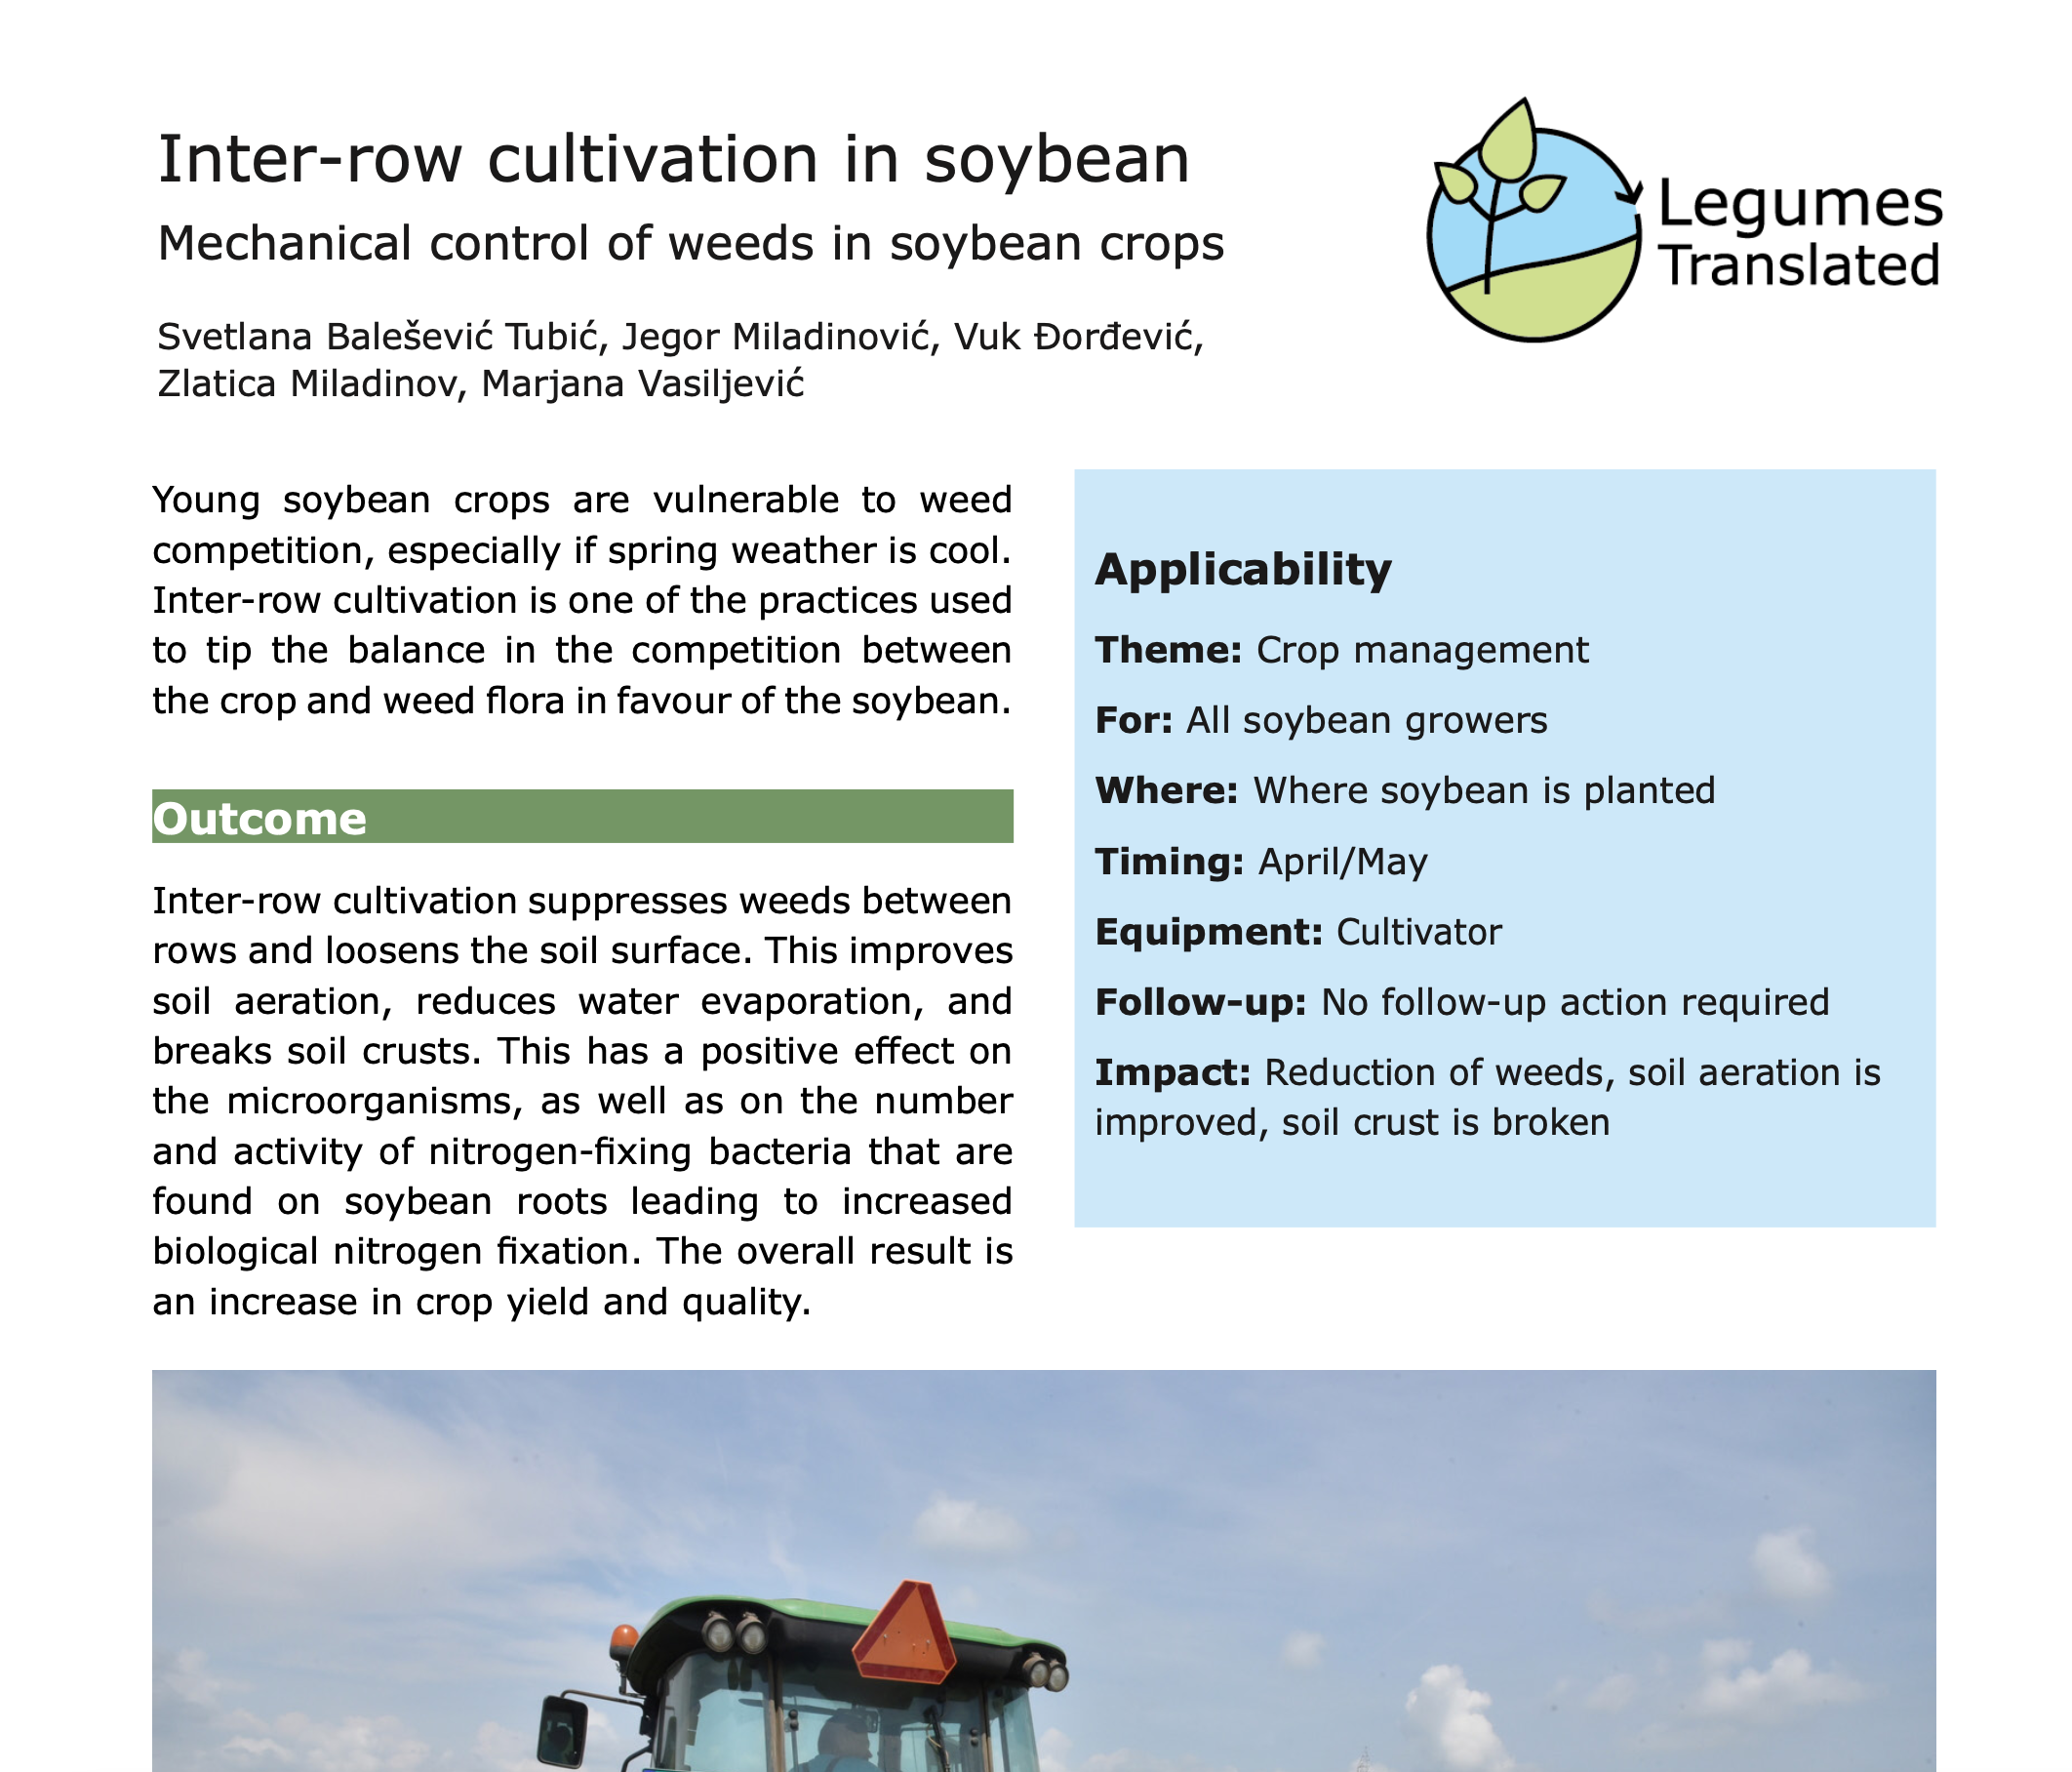 Inter-row cultivation - Mechanical control of weeds in soybean crops